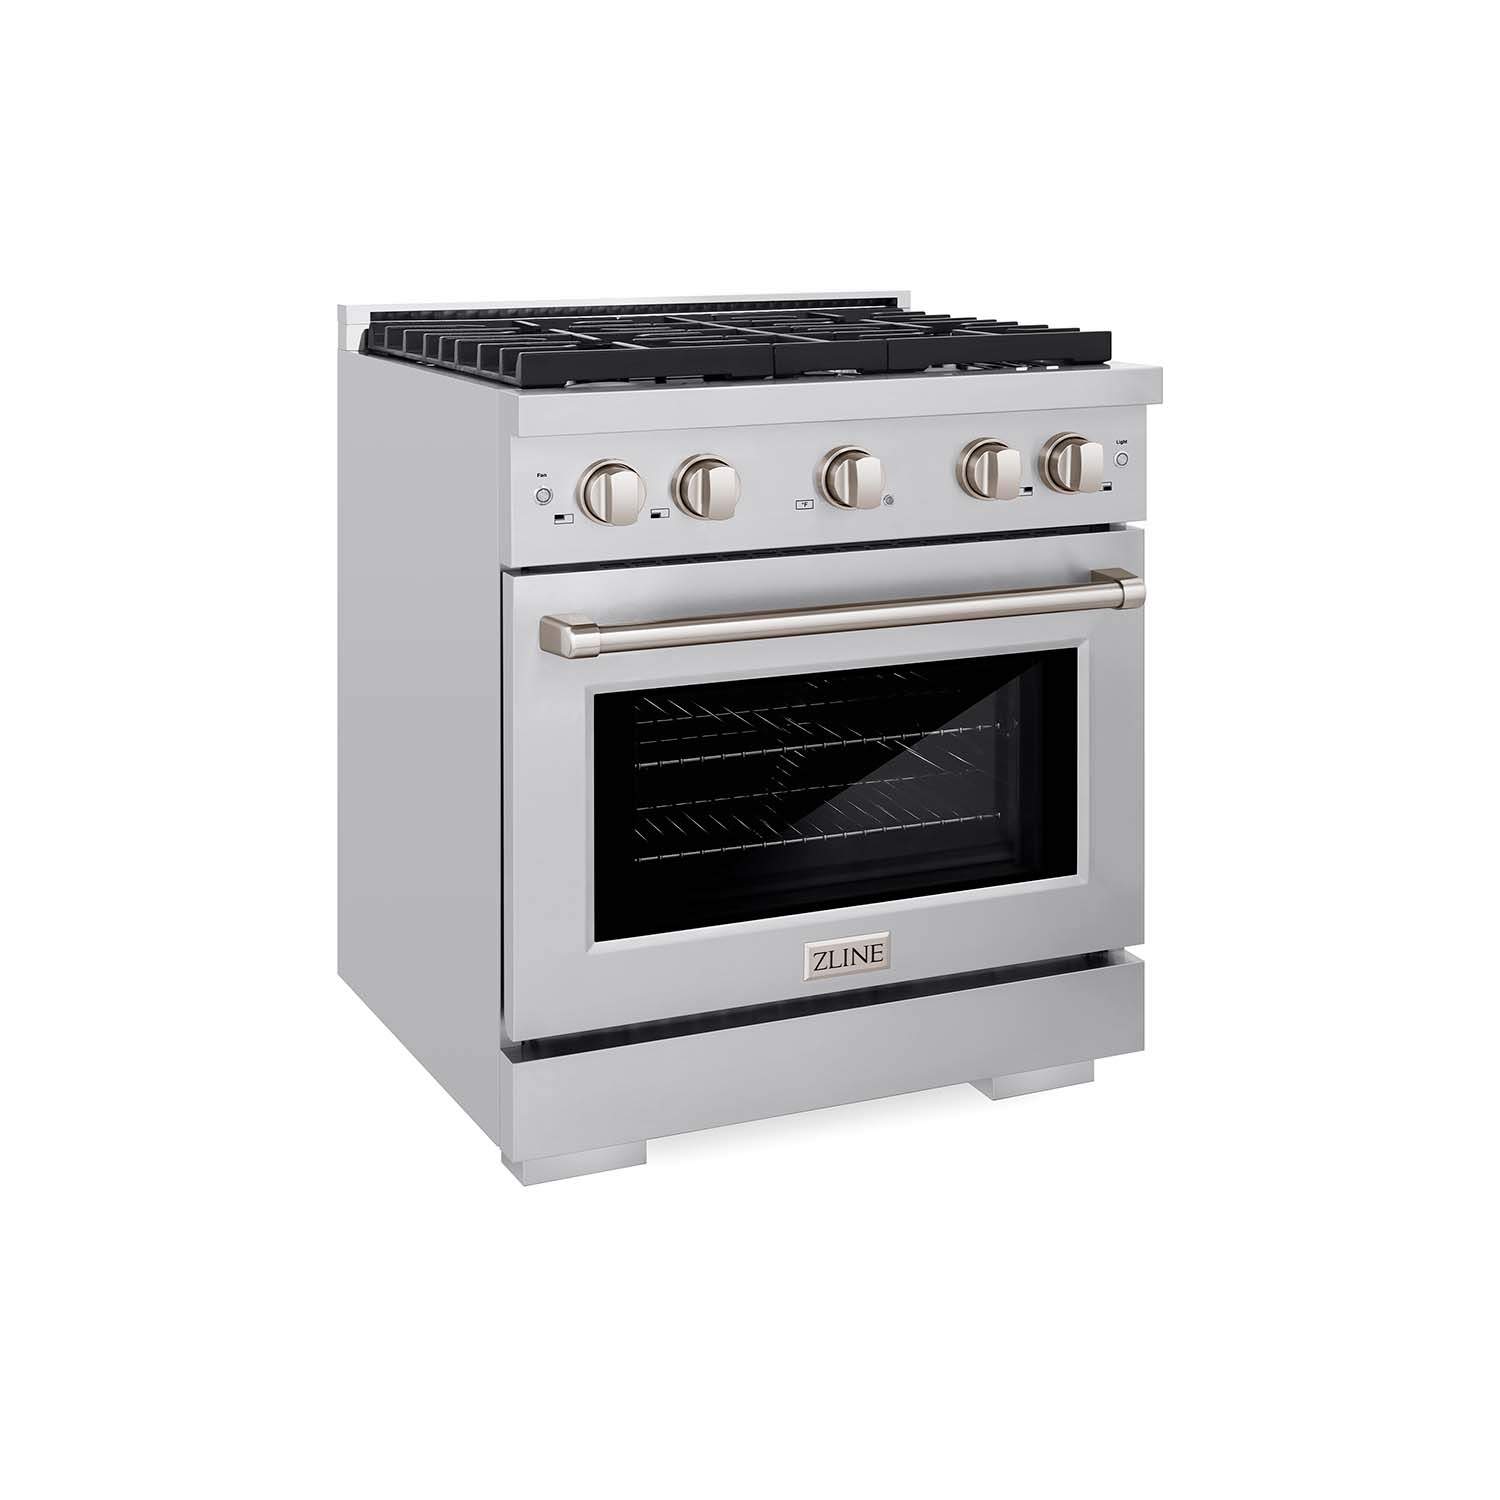 ZLINE 30 in. 4.2 cu. ft. 4 Burner Gas Range with Convection Gas Oven in Stainless Steel (SGR30) side, oven closed.